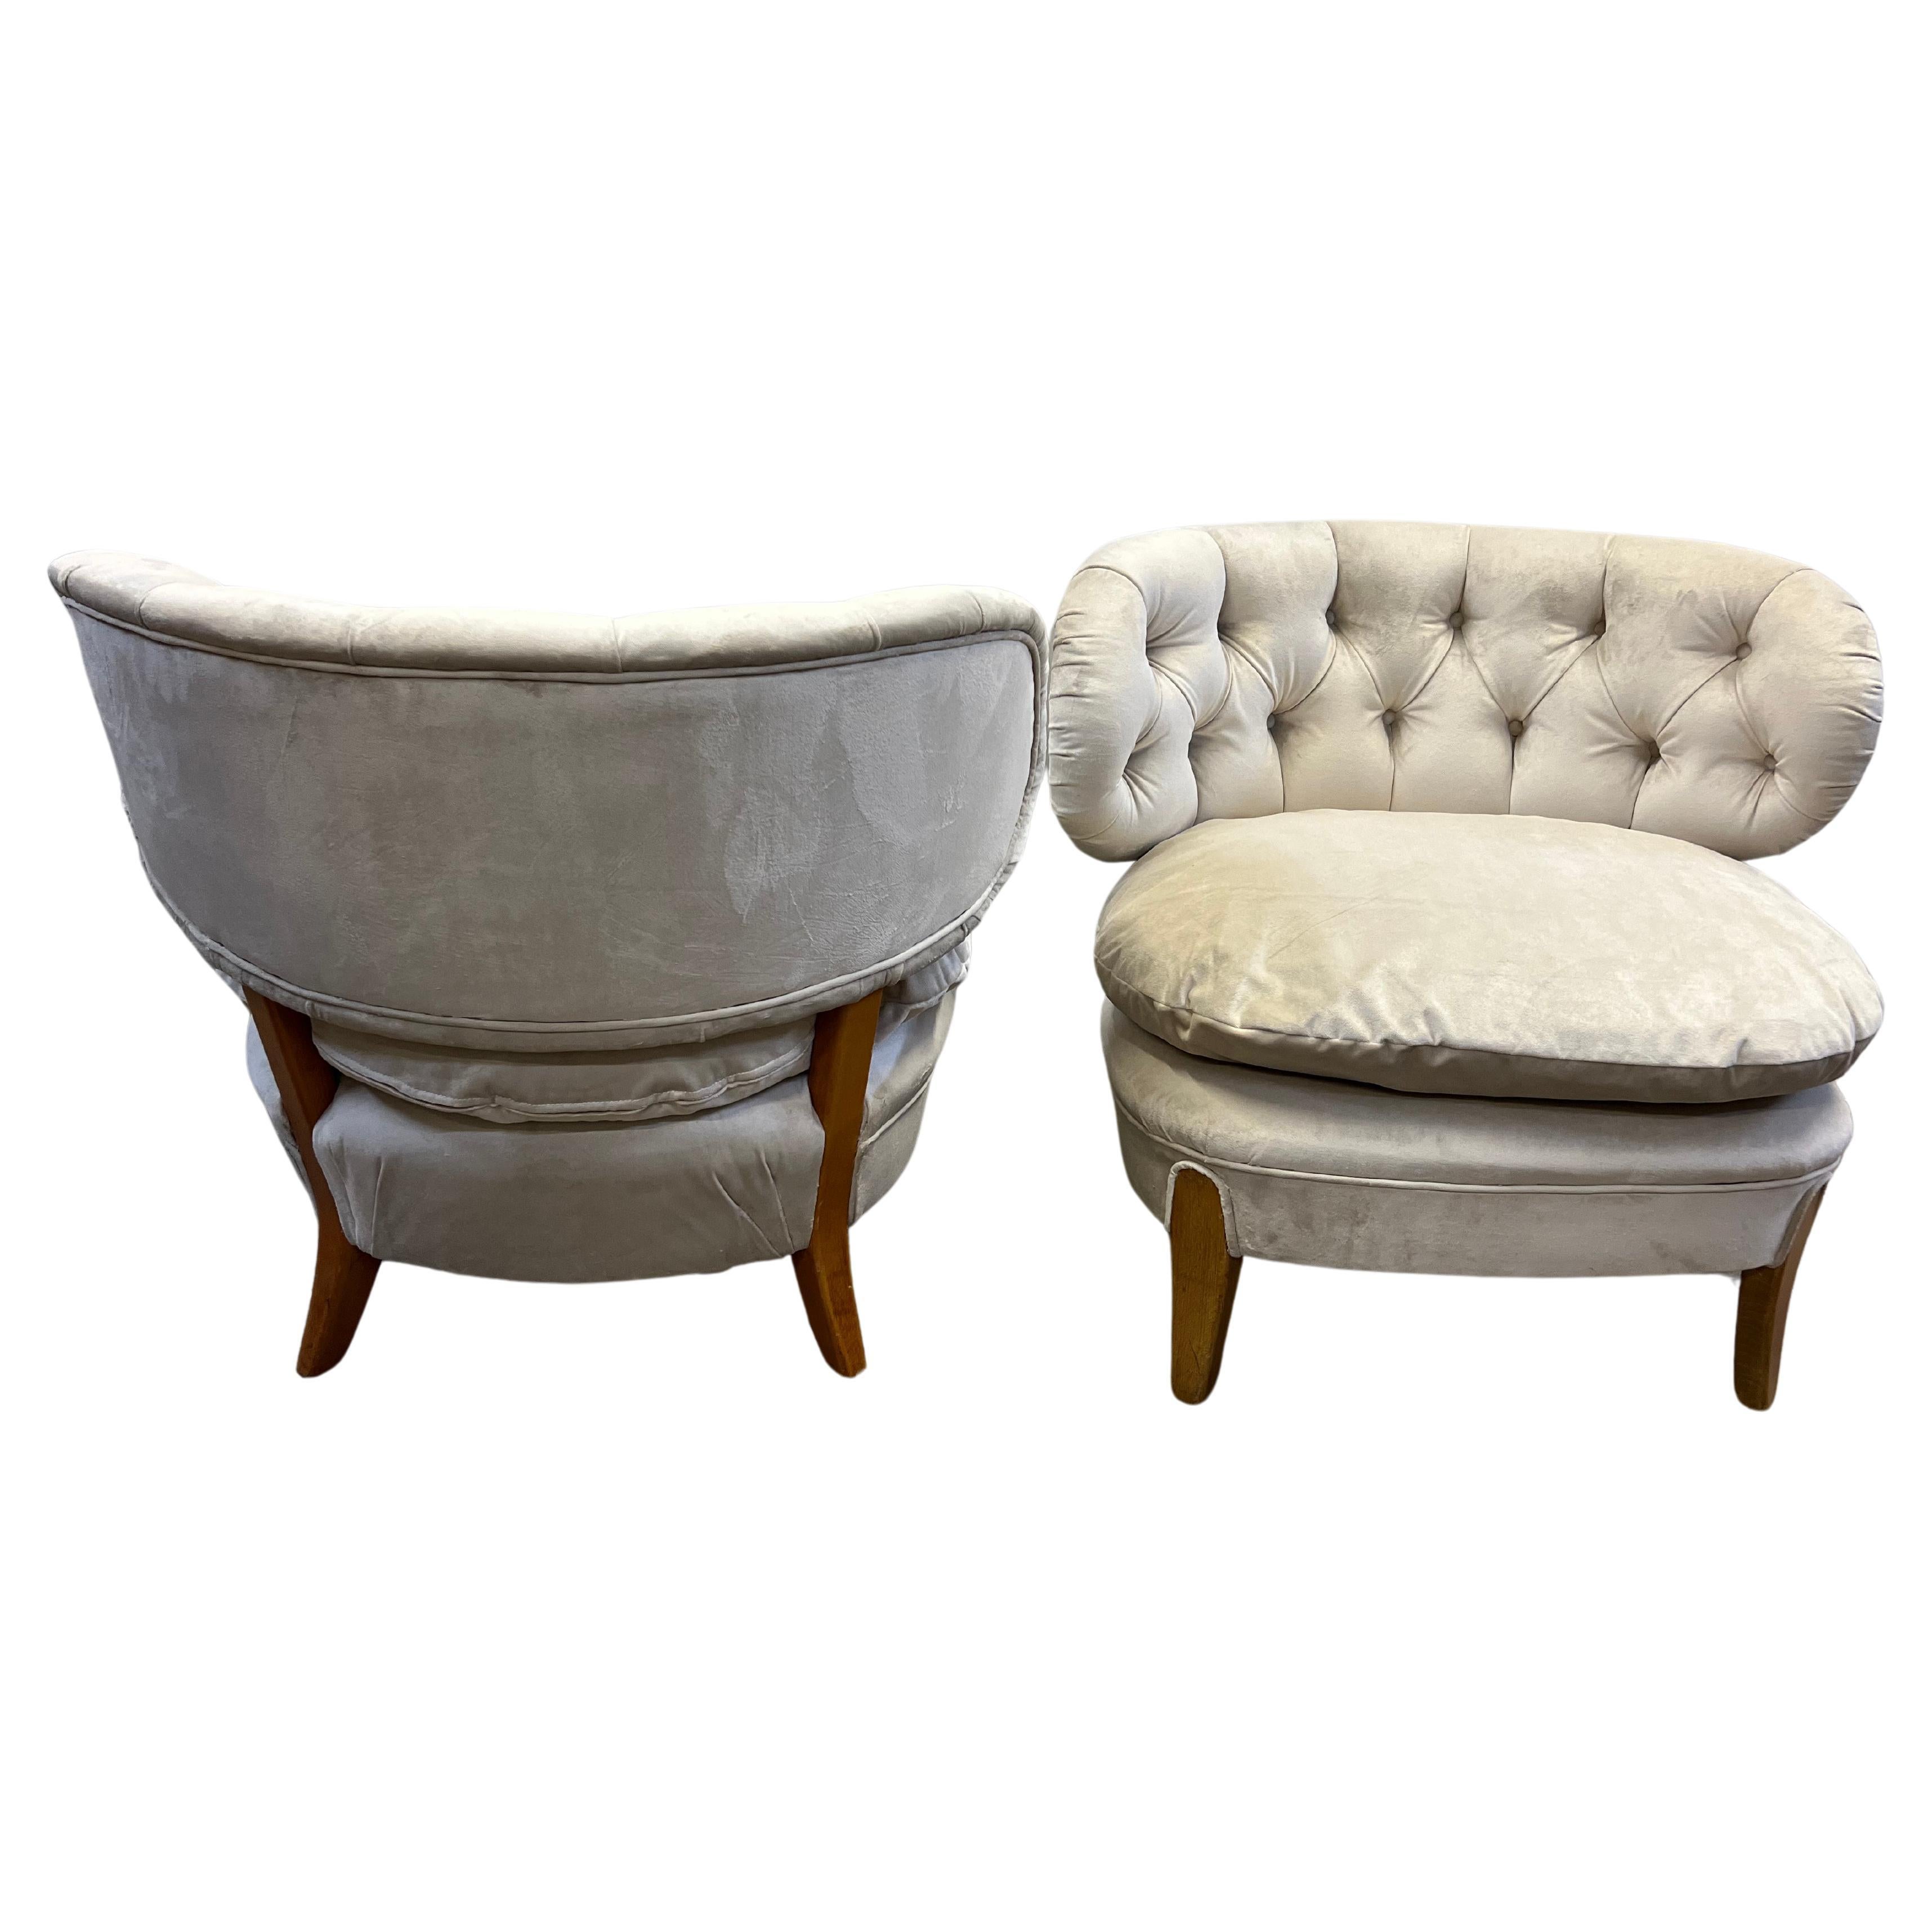 Scandinavian Modern Pair of Otto Schultz Newly Upholstered Velvet Chairs, circa 1940s For Sale